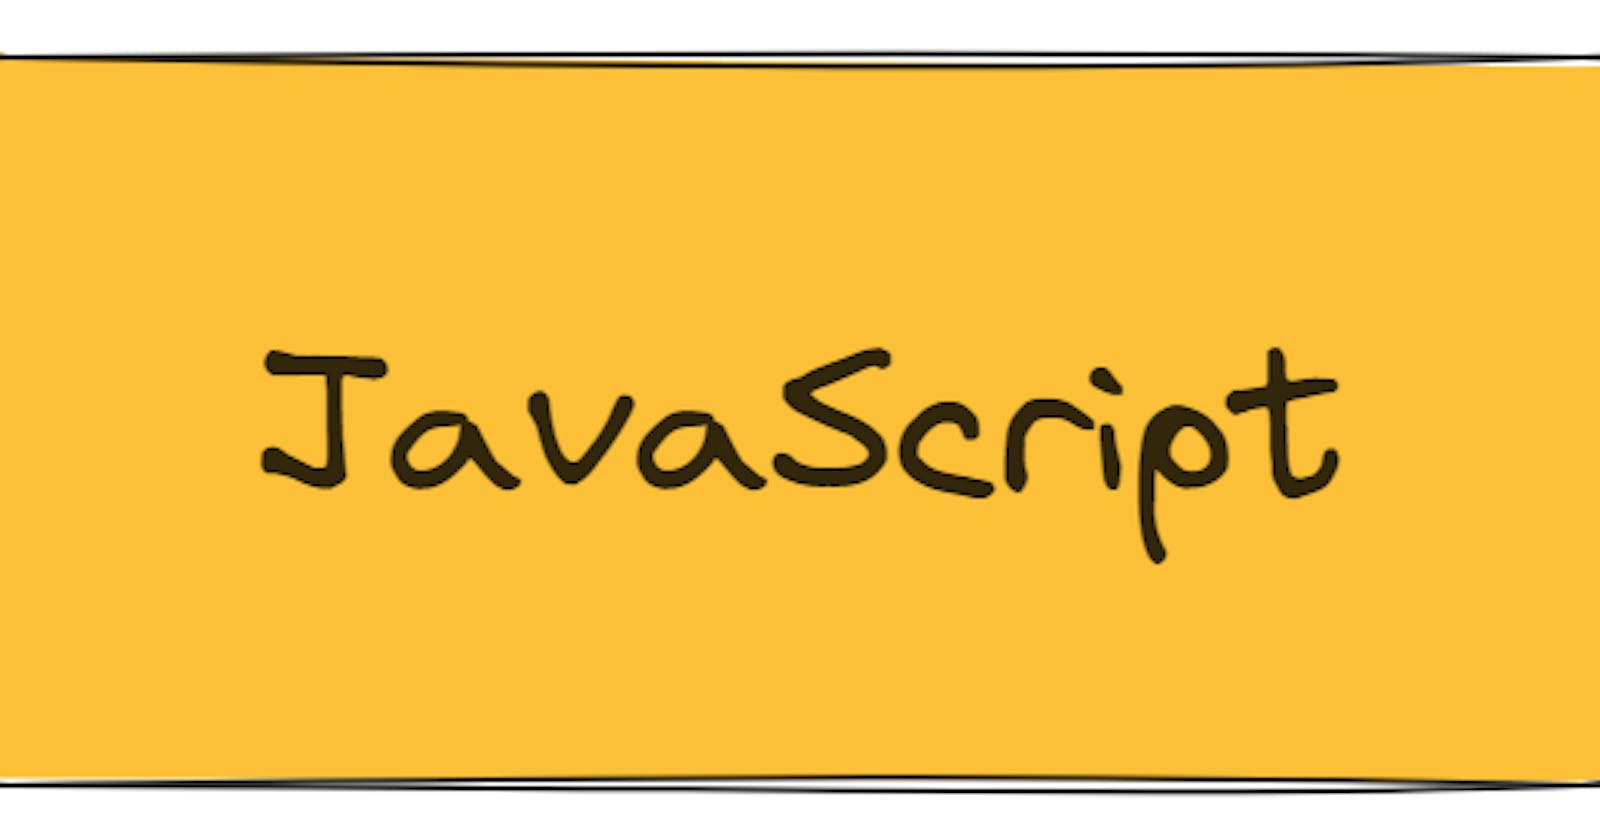 An Introduction to JavaScript